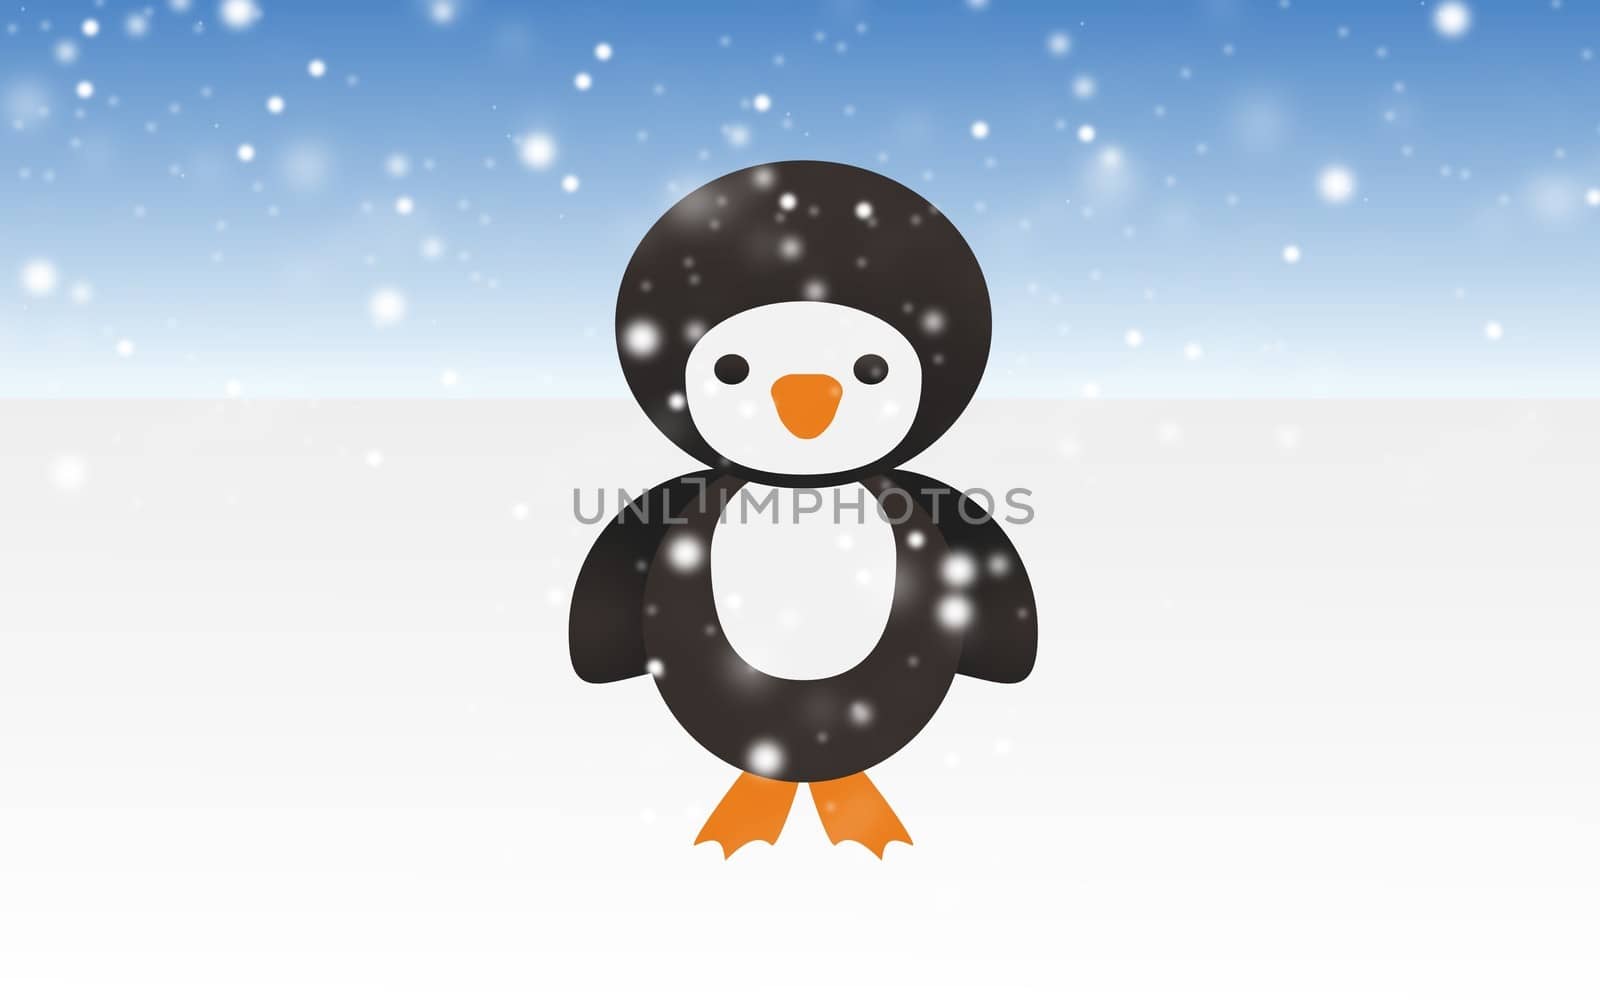 Illustration of a Penguin in the snow